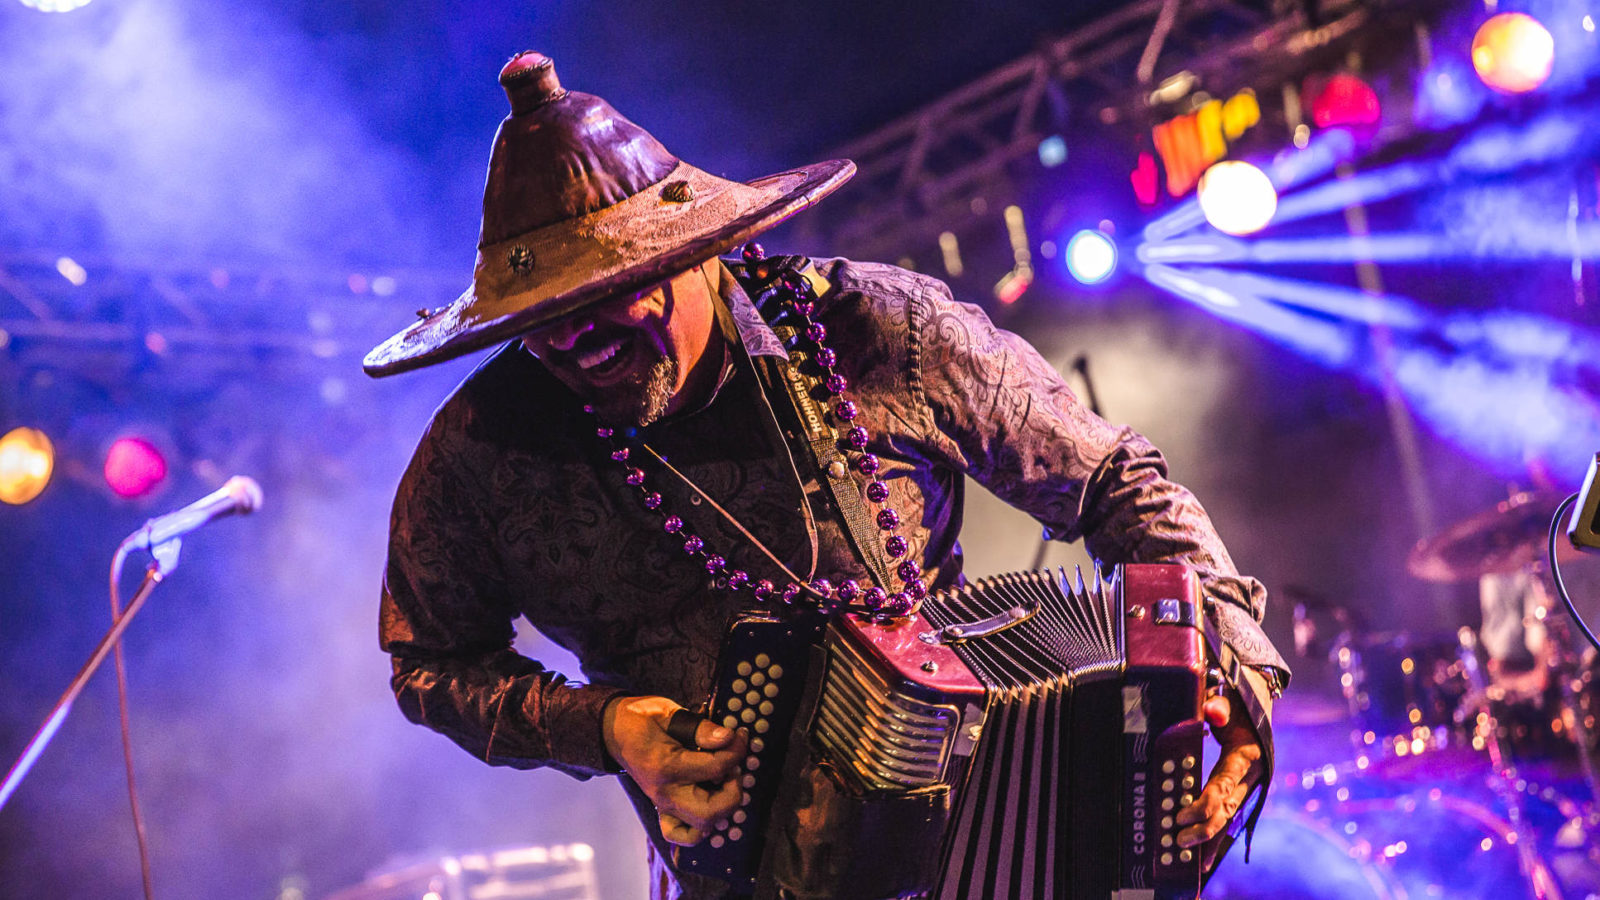 Grammy-winning Zydeco musician Terrance Ximien performs on piano accordion in his Fulani hat from Mali, laughing in purple light.